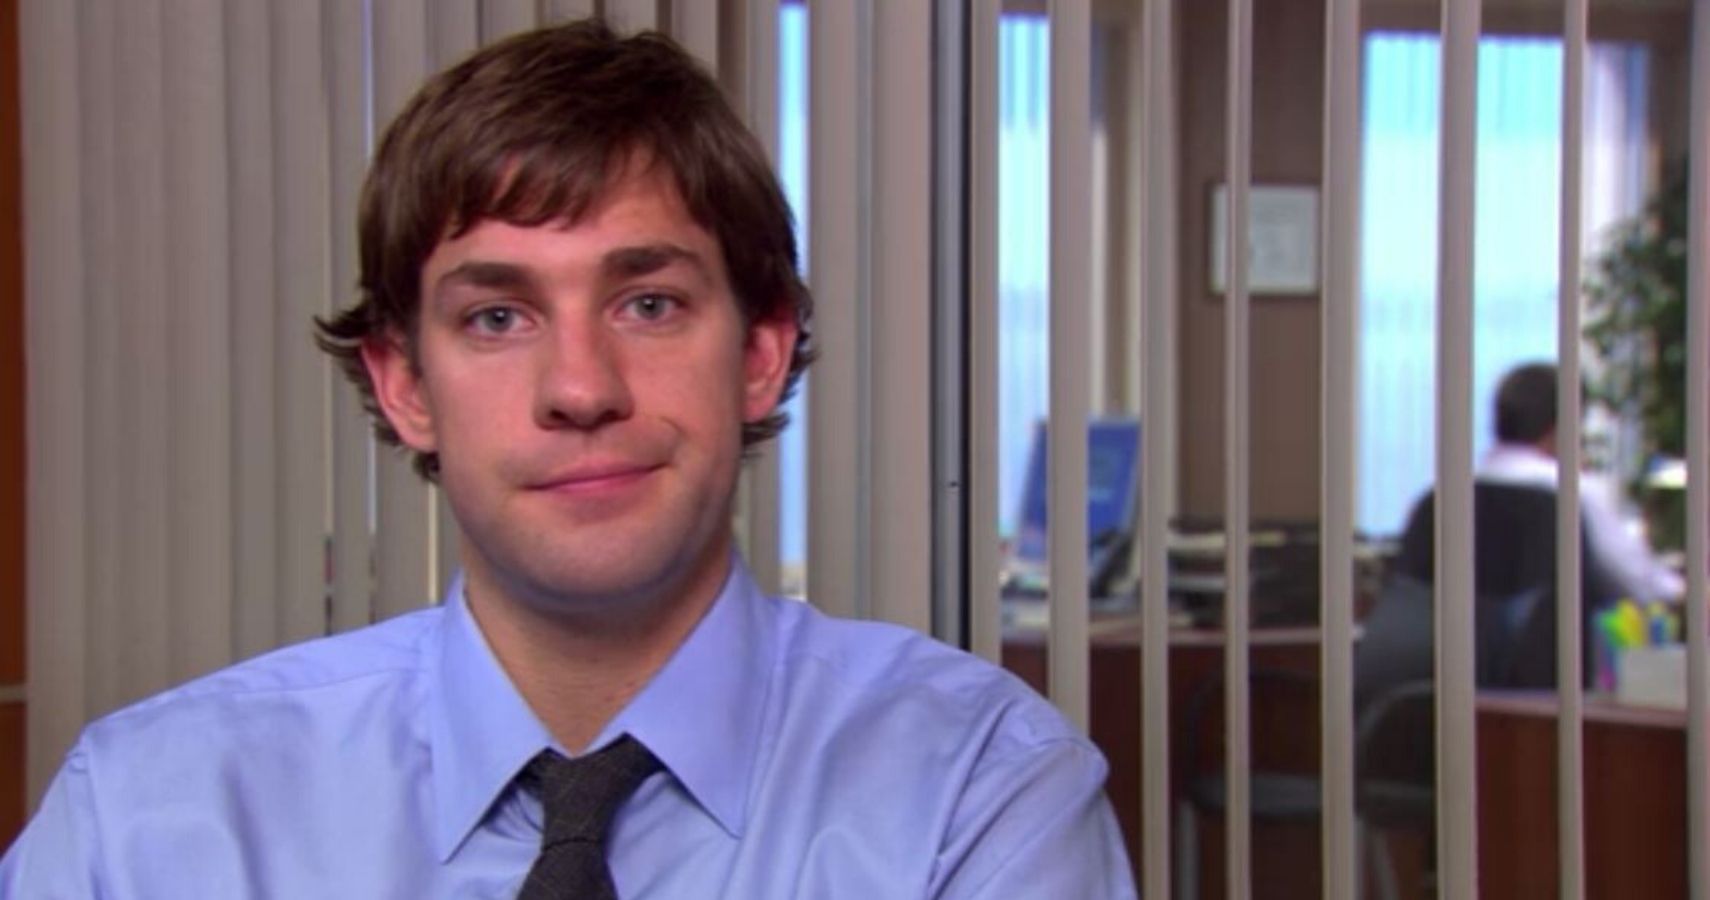 The Office: 5 Most Inspirational Jim Scenes (& 5 Where Fans Felt Sorry